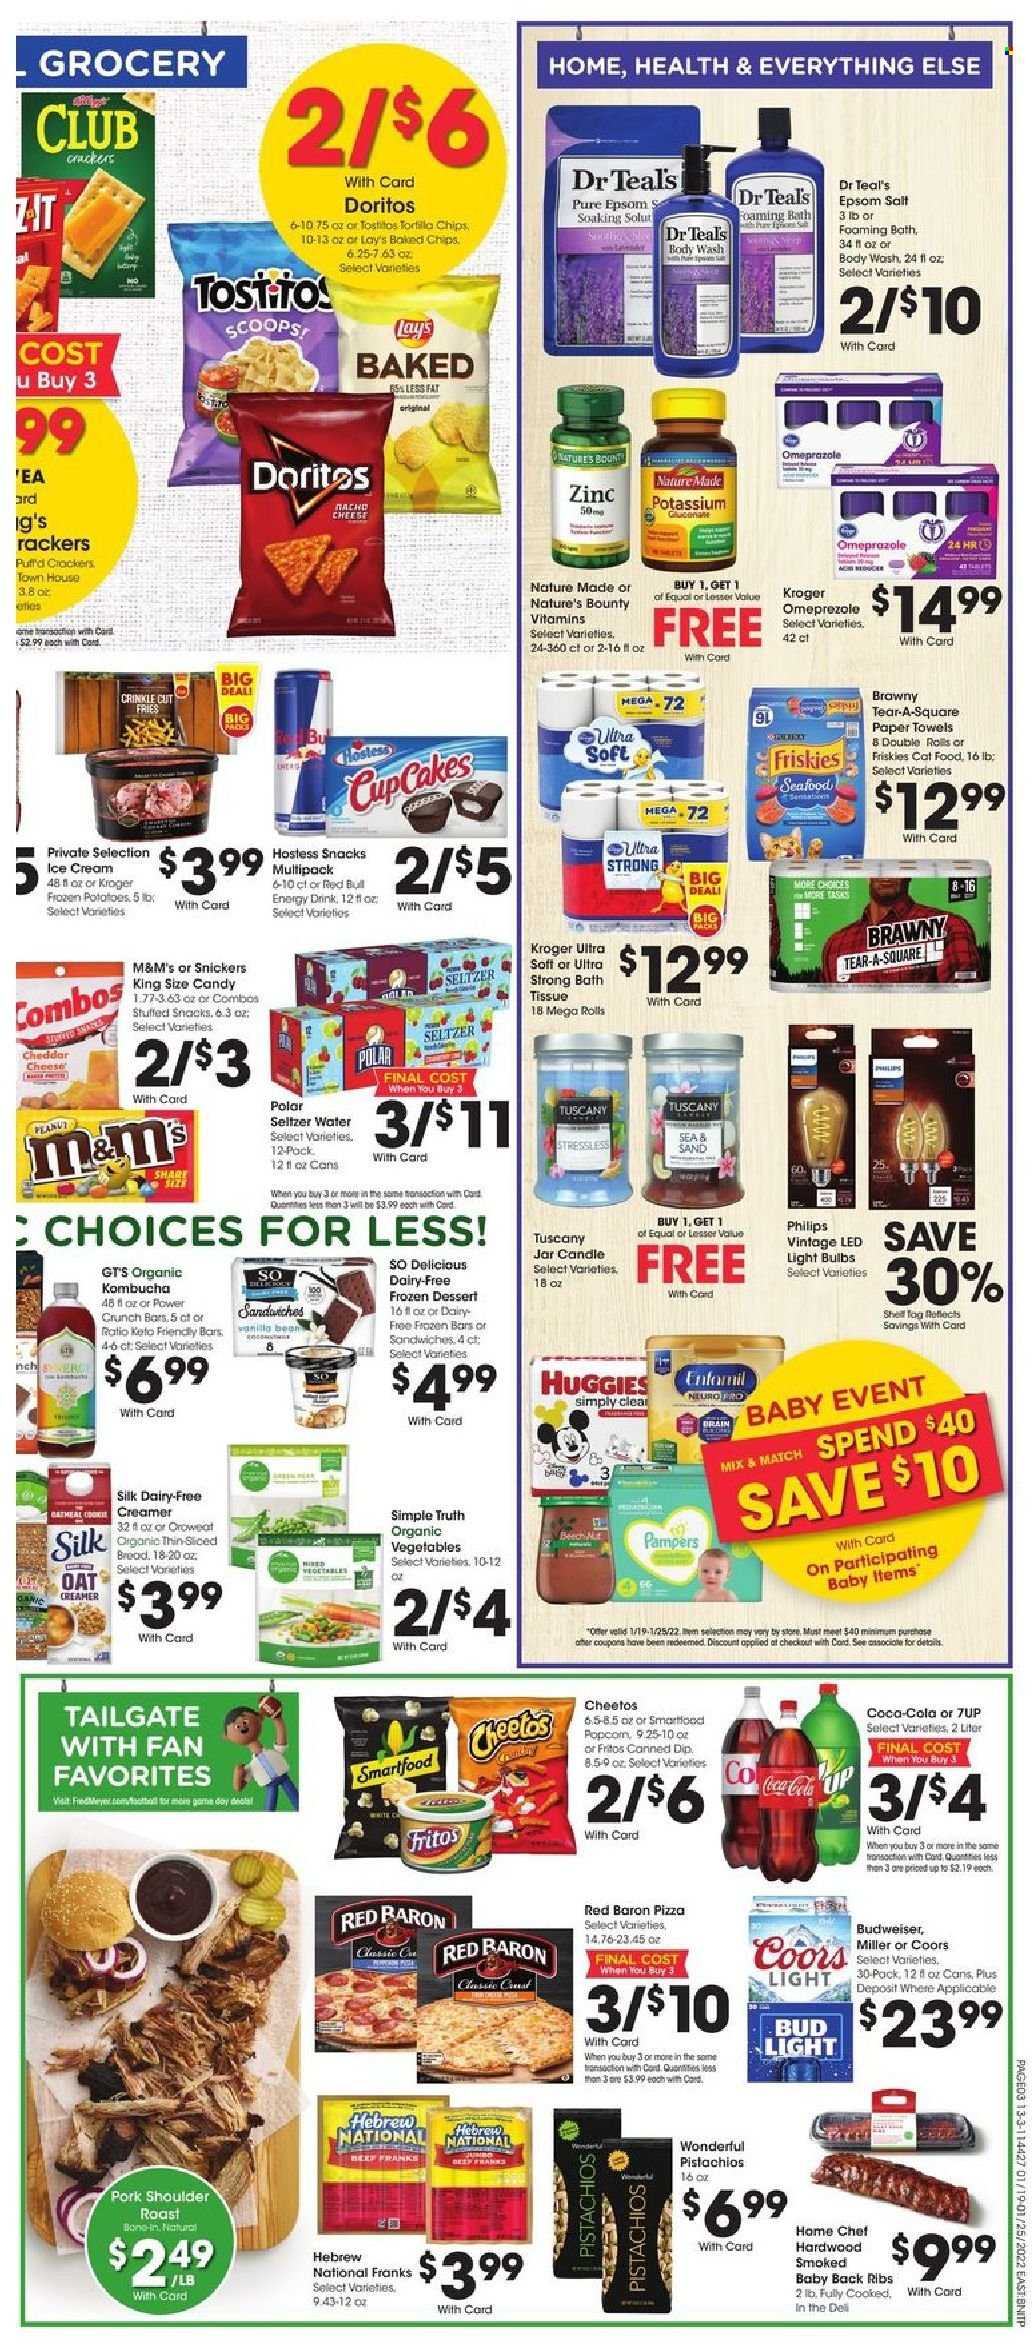 thumbnail - Fred Meyer Flyer - 01/19/2022 - 01/25/2022 - Sales products - Philips, potatoes, pizza, Silk, creamer, dip, potato fries, Red Baron, snack, Snickers, M&M's, crackers, Doritos, Fritos, Cheetos, Lay’s, Smartfood, oats, pistachios, Coca-Cola, energy drink, 7UP, seltzer water, kombucha, beer, Bud Light, Miller, pork meat, pork ribs, pork roast, pork shoulder, pork back ribs, Huggies, Pampers, bath tissue, kitchen towels, paper towels, body wash, candle, bulb, light bulb, animal food, cat food, Friskies, LED light, Shell, Nature Made, Nature's Bounty, zinc, Budweiser, Coors. Page 6.